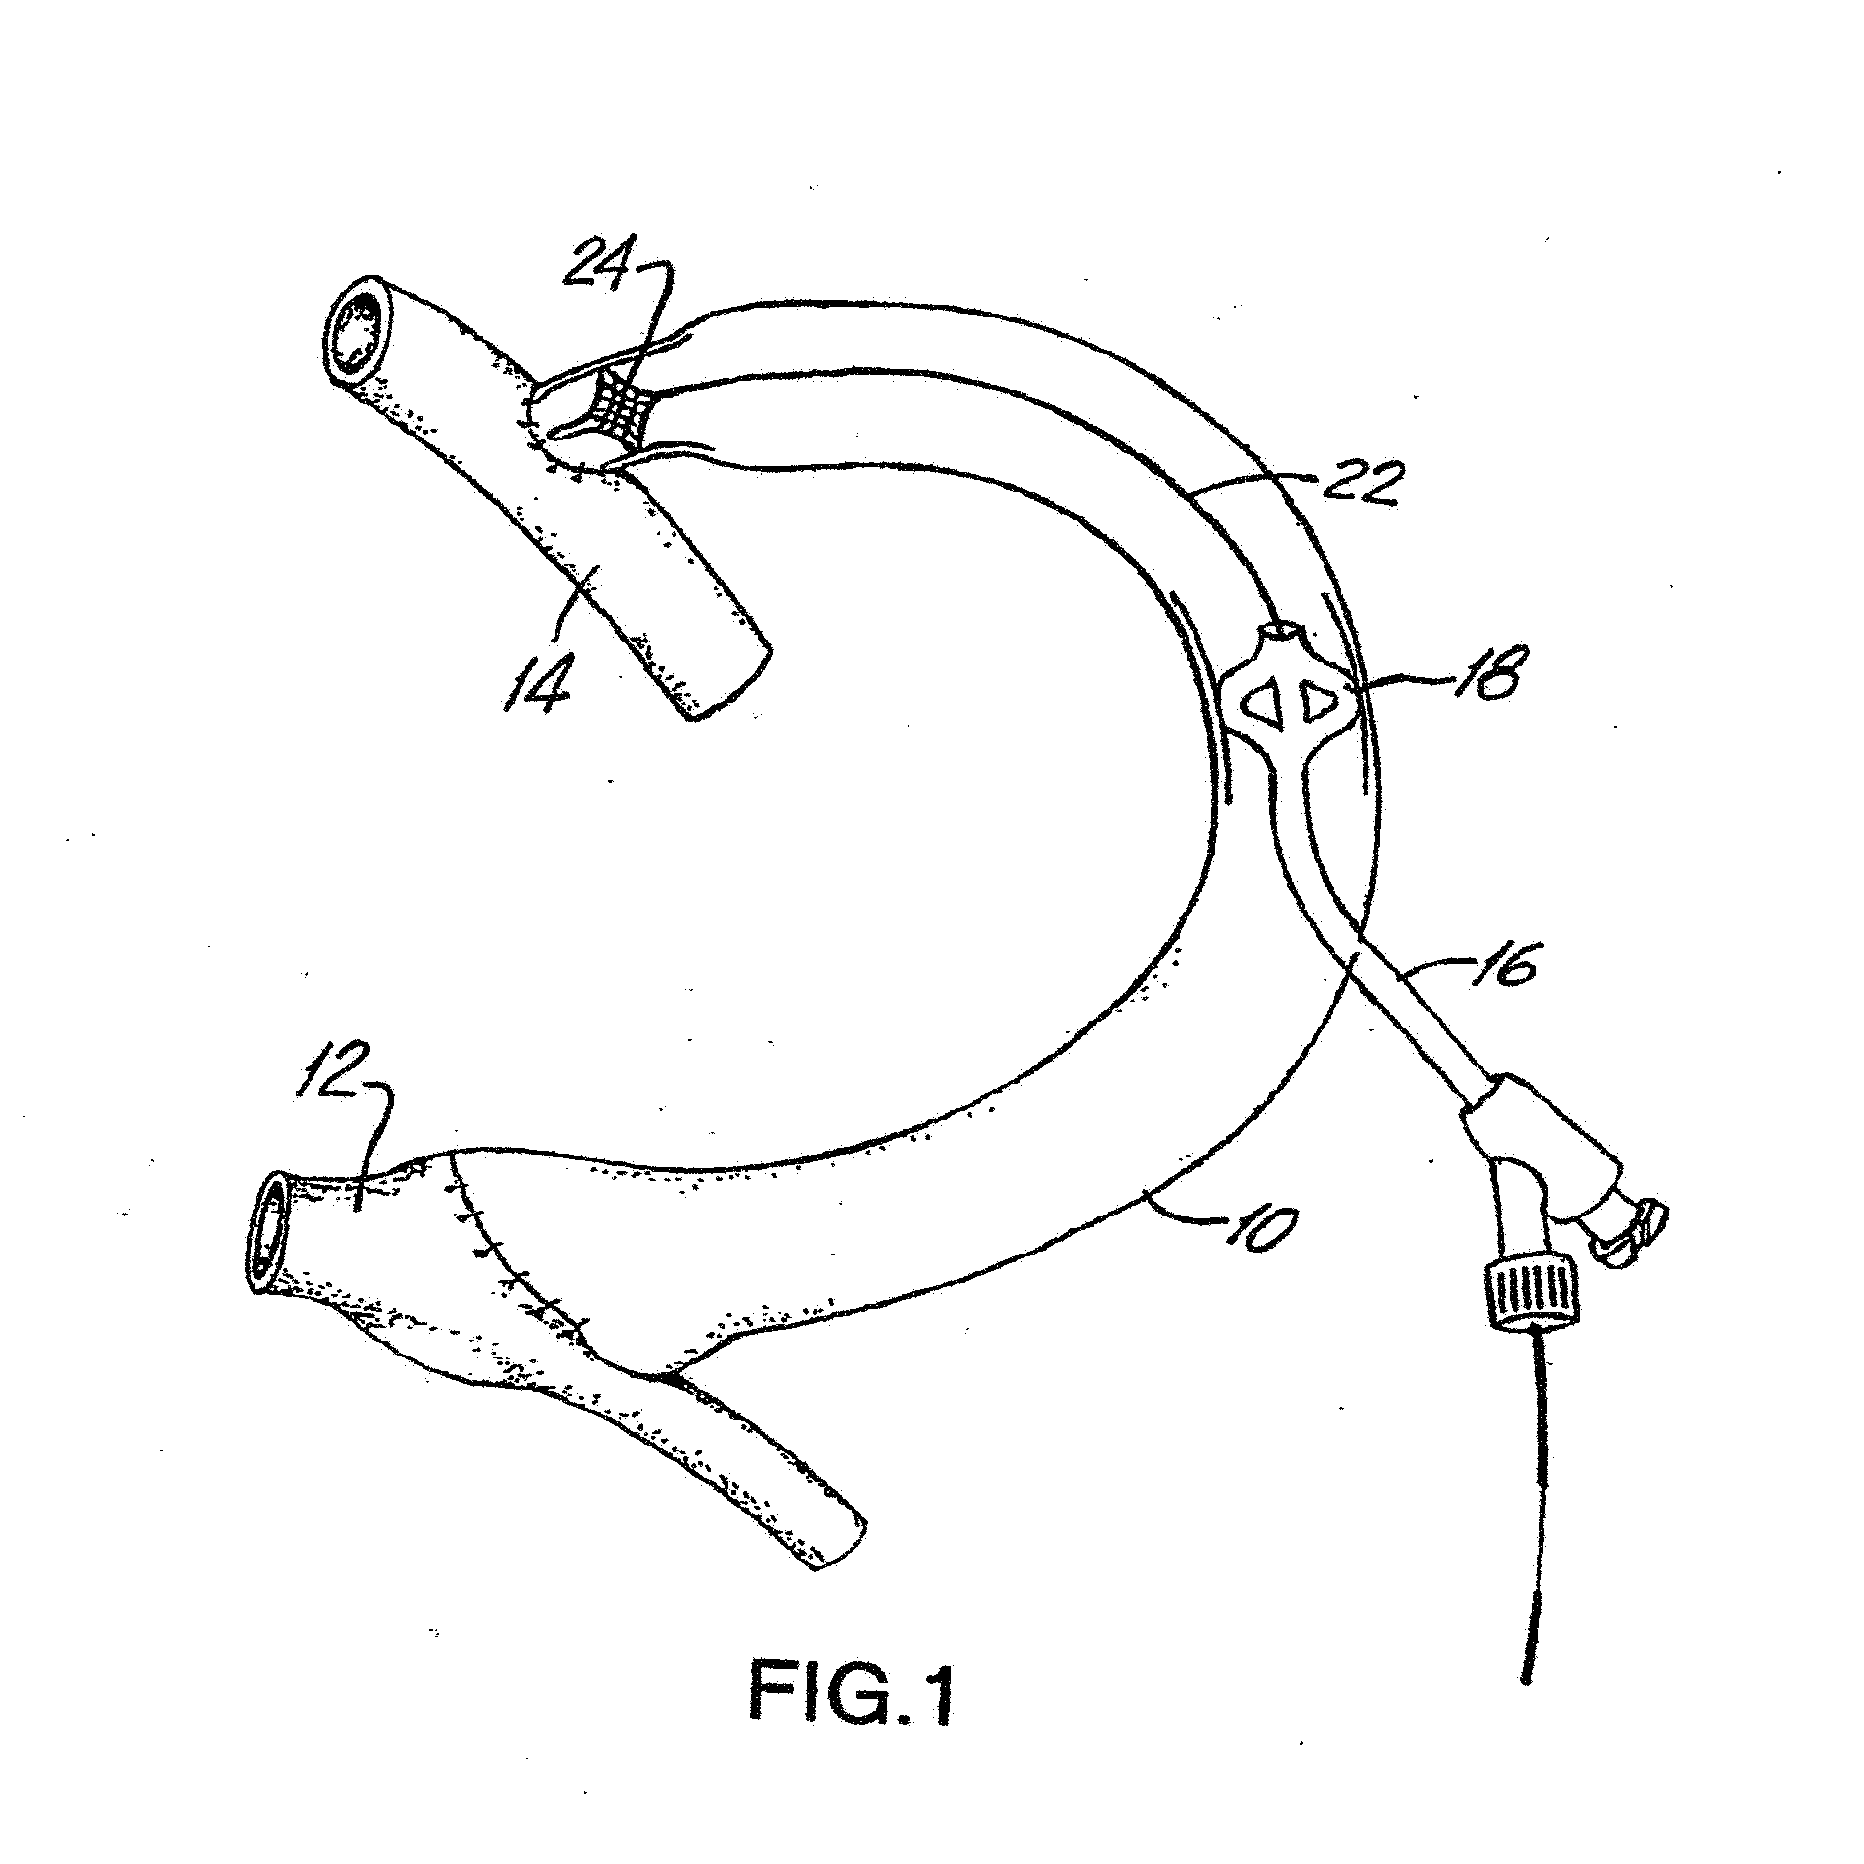 Temporary Vascular Scaffold and Scoring Device